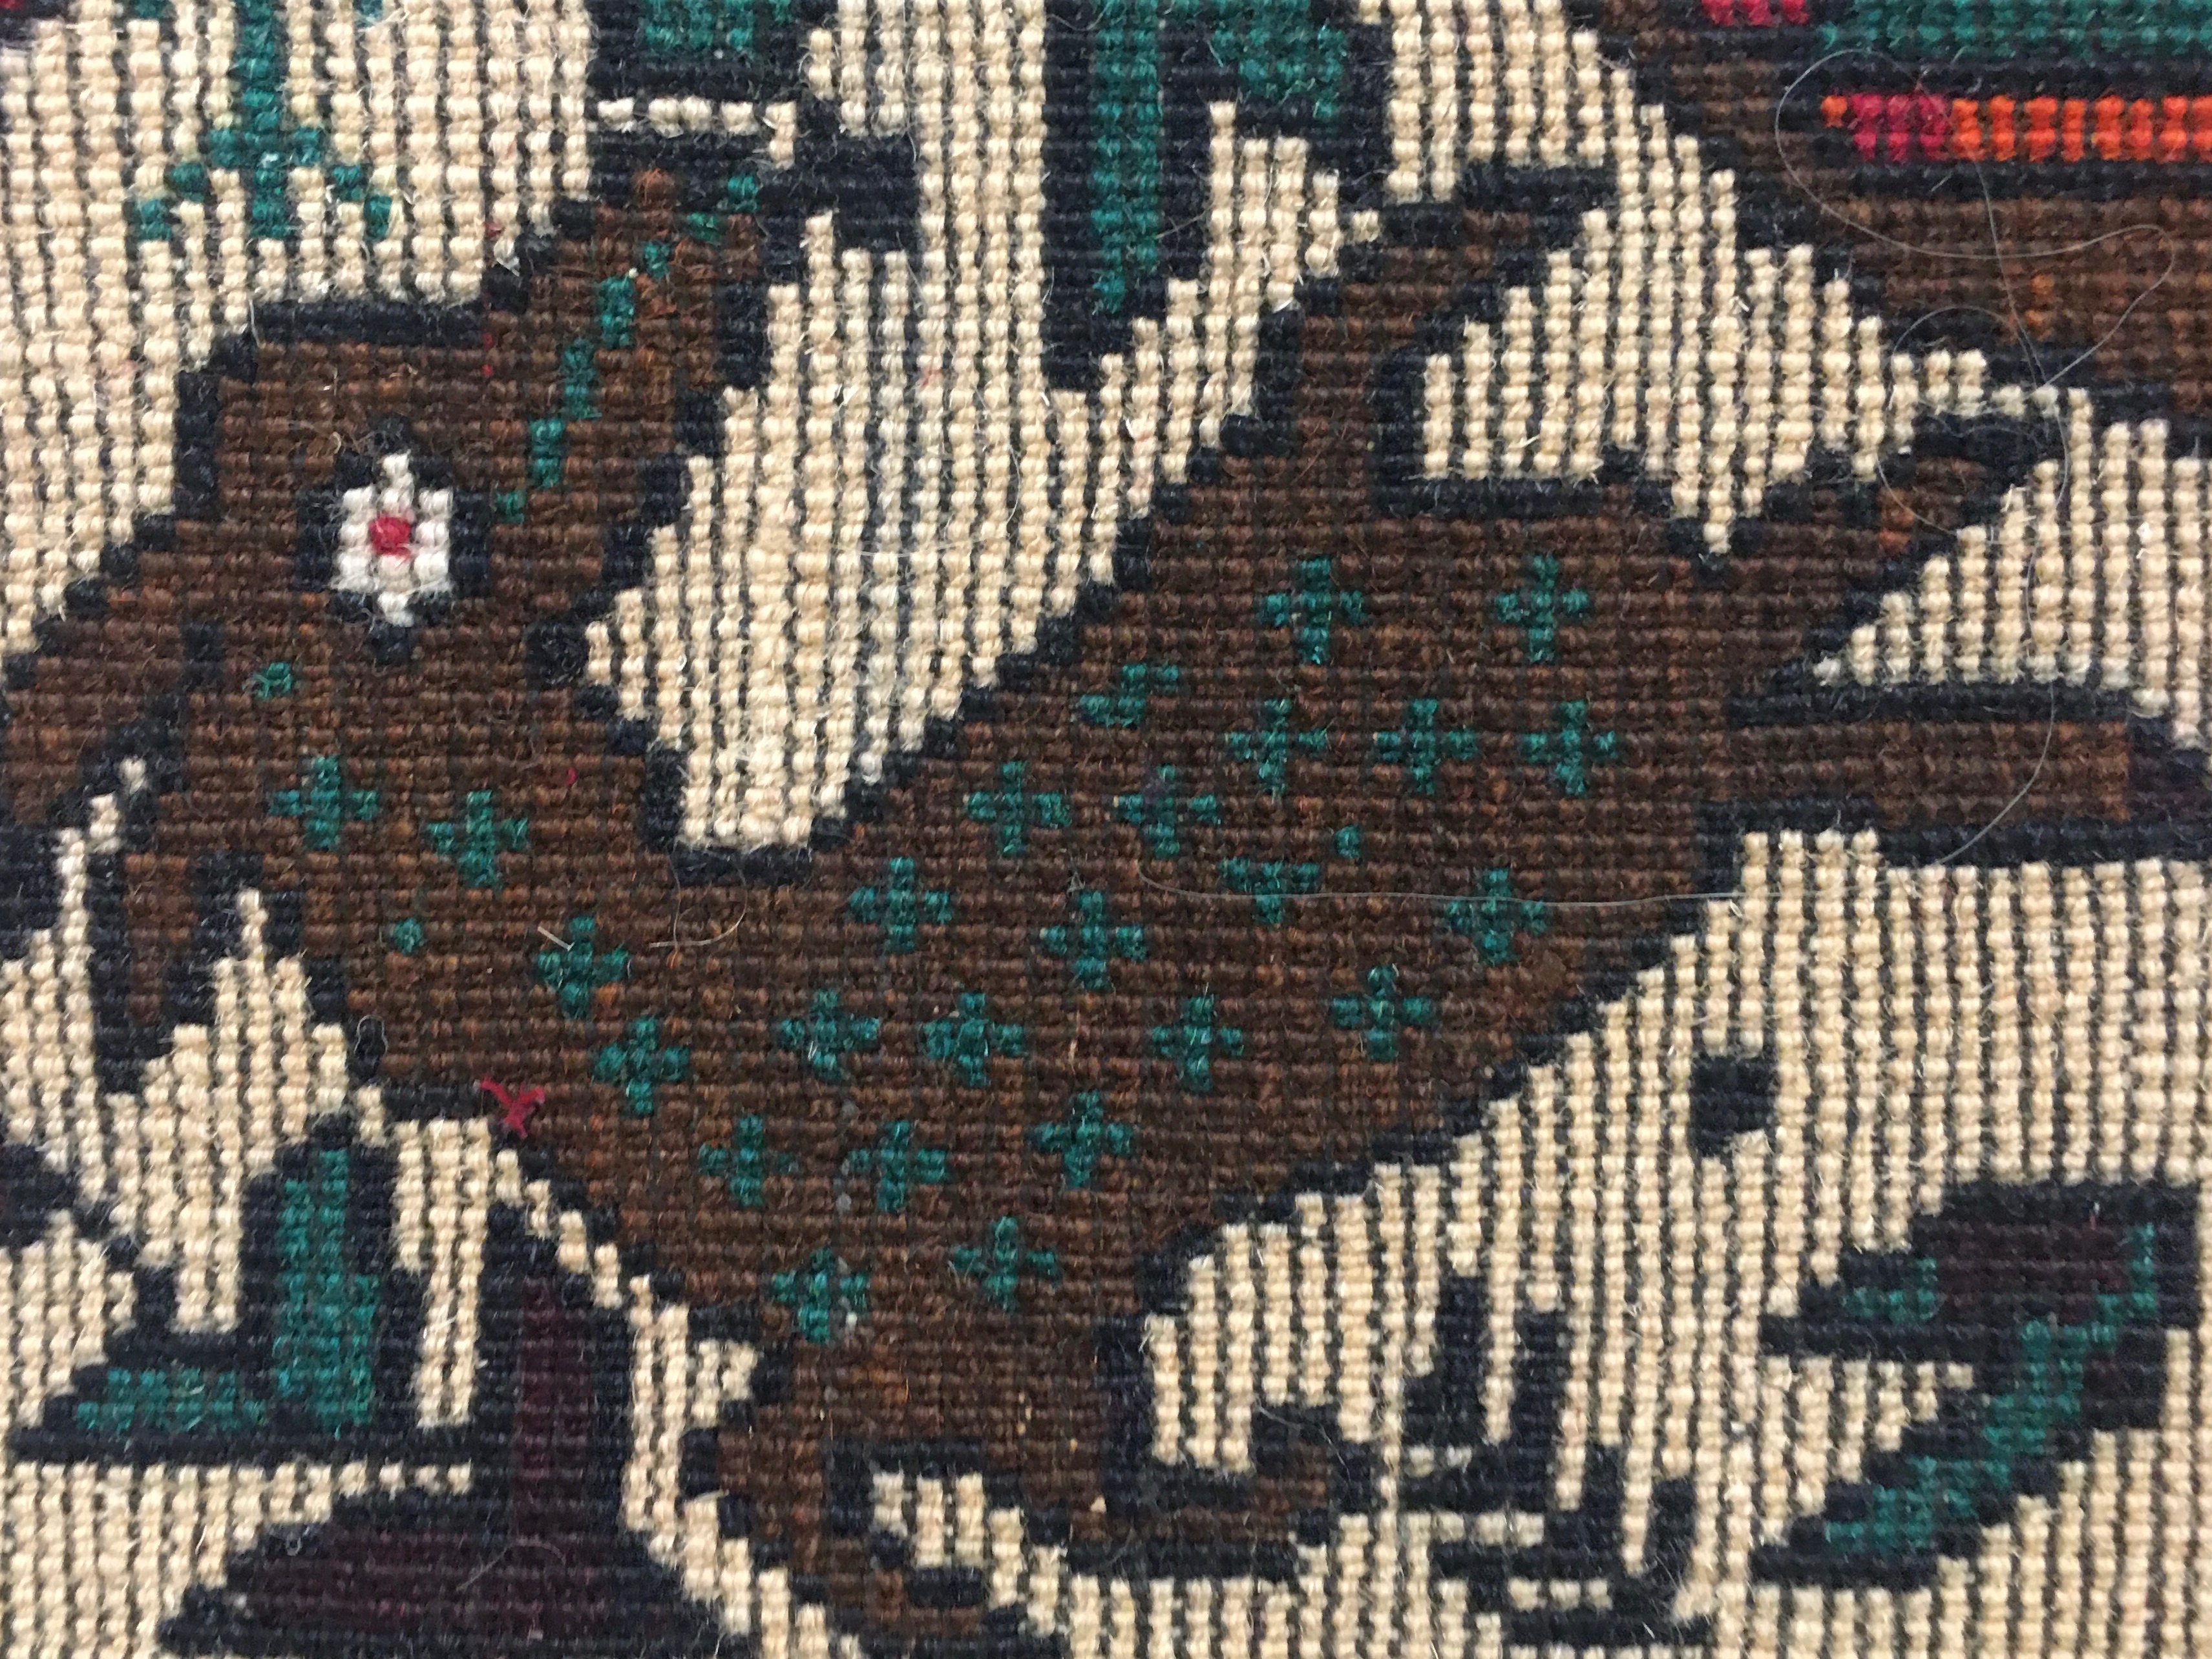 A detail of the of a deer shown from the back of the rug